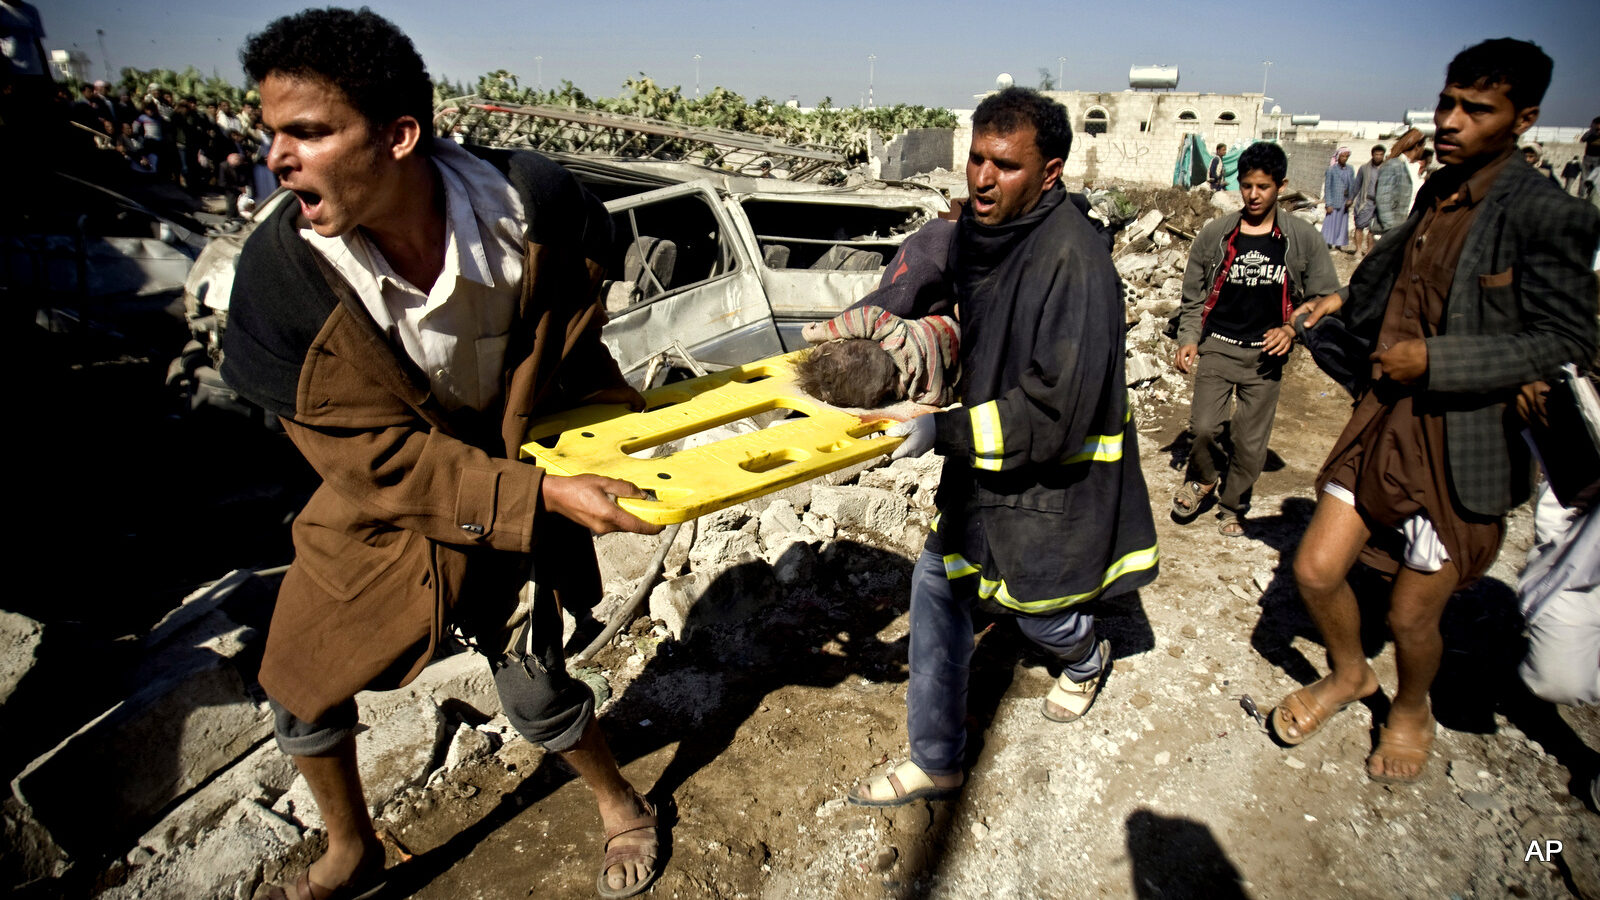 YemenPeople carry the body of a child they uncovered from under the rubble of houses destroyed by Saudi airstrikes near Sanaa Airport, Yemen, Thursday, March 26, 2015. Saudi Arabia launched airstrikes Thursday targeting military installations in Yemen held by Shiite rebels who were taking over a key port city in the country's south and had driven the embattled president to flee by sea, security officials said.